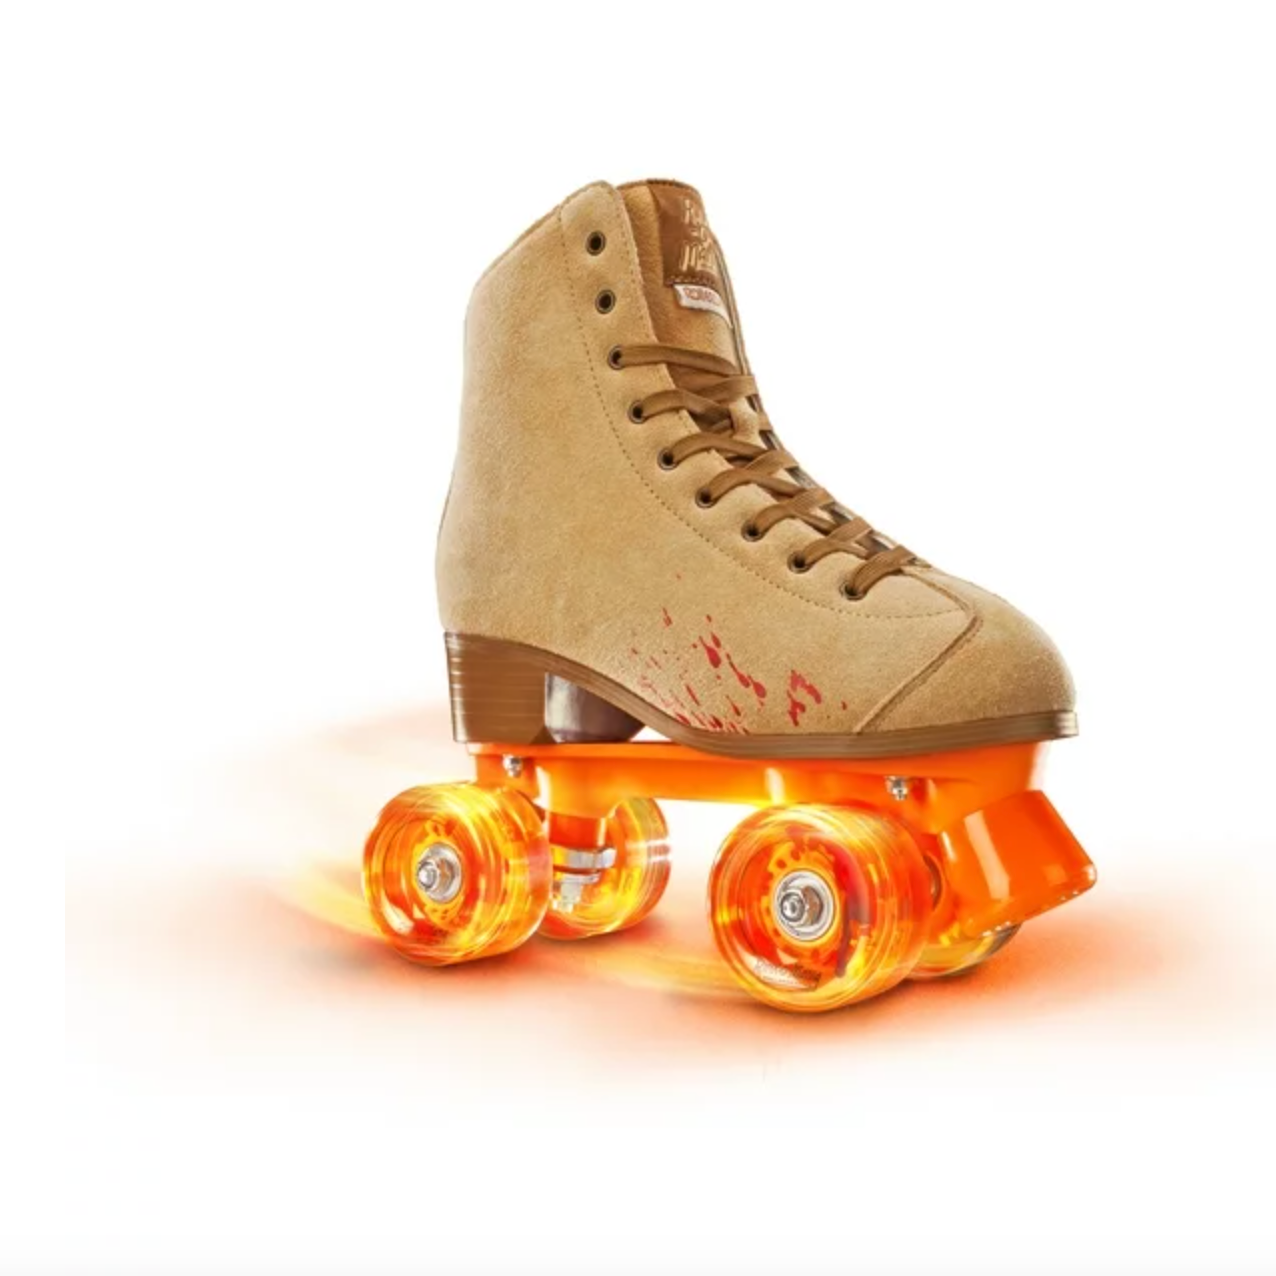 Stranger Things Rink-O-Mania Rental Skates by Roller Derby, Unisex, Collector Edition